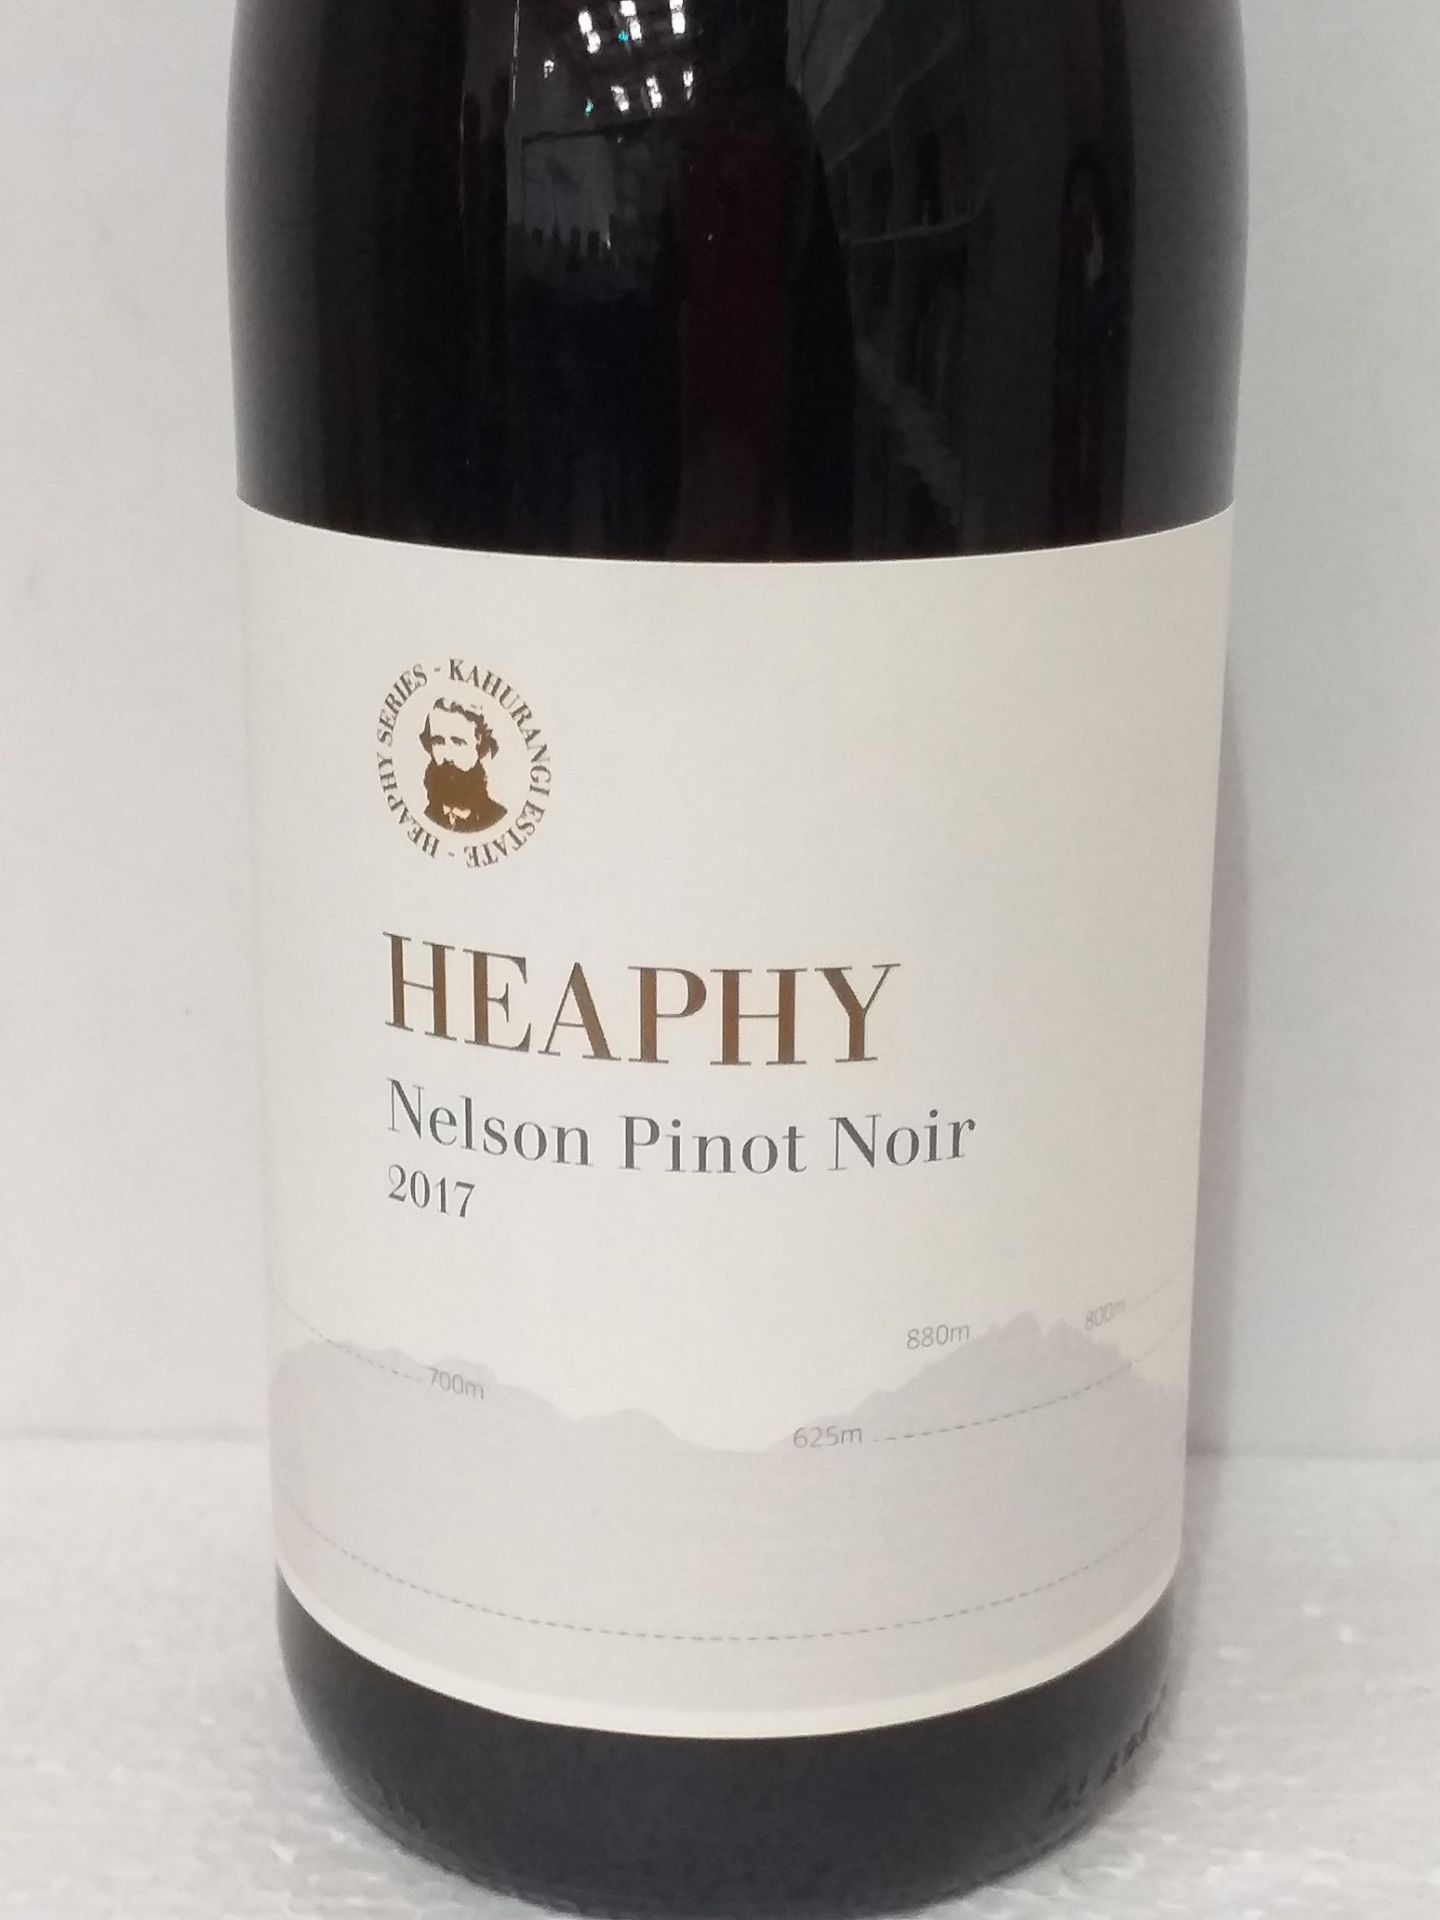 12 Bottles of Heaphy Pinot Noir 2017 - Image 2 of 3